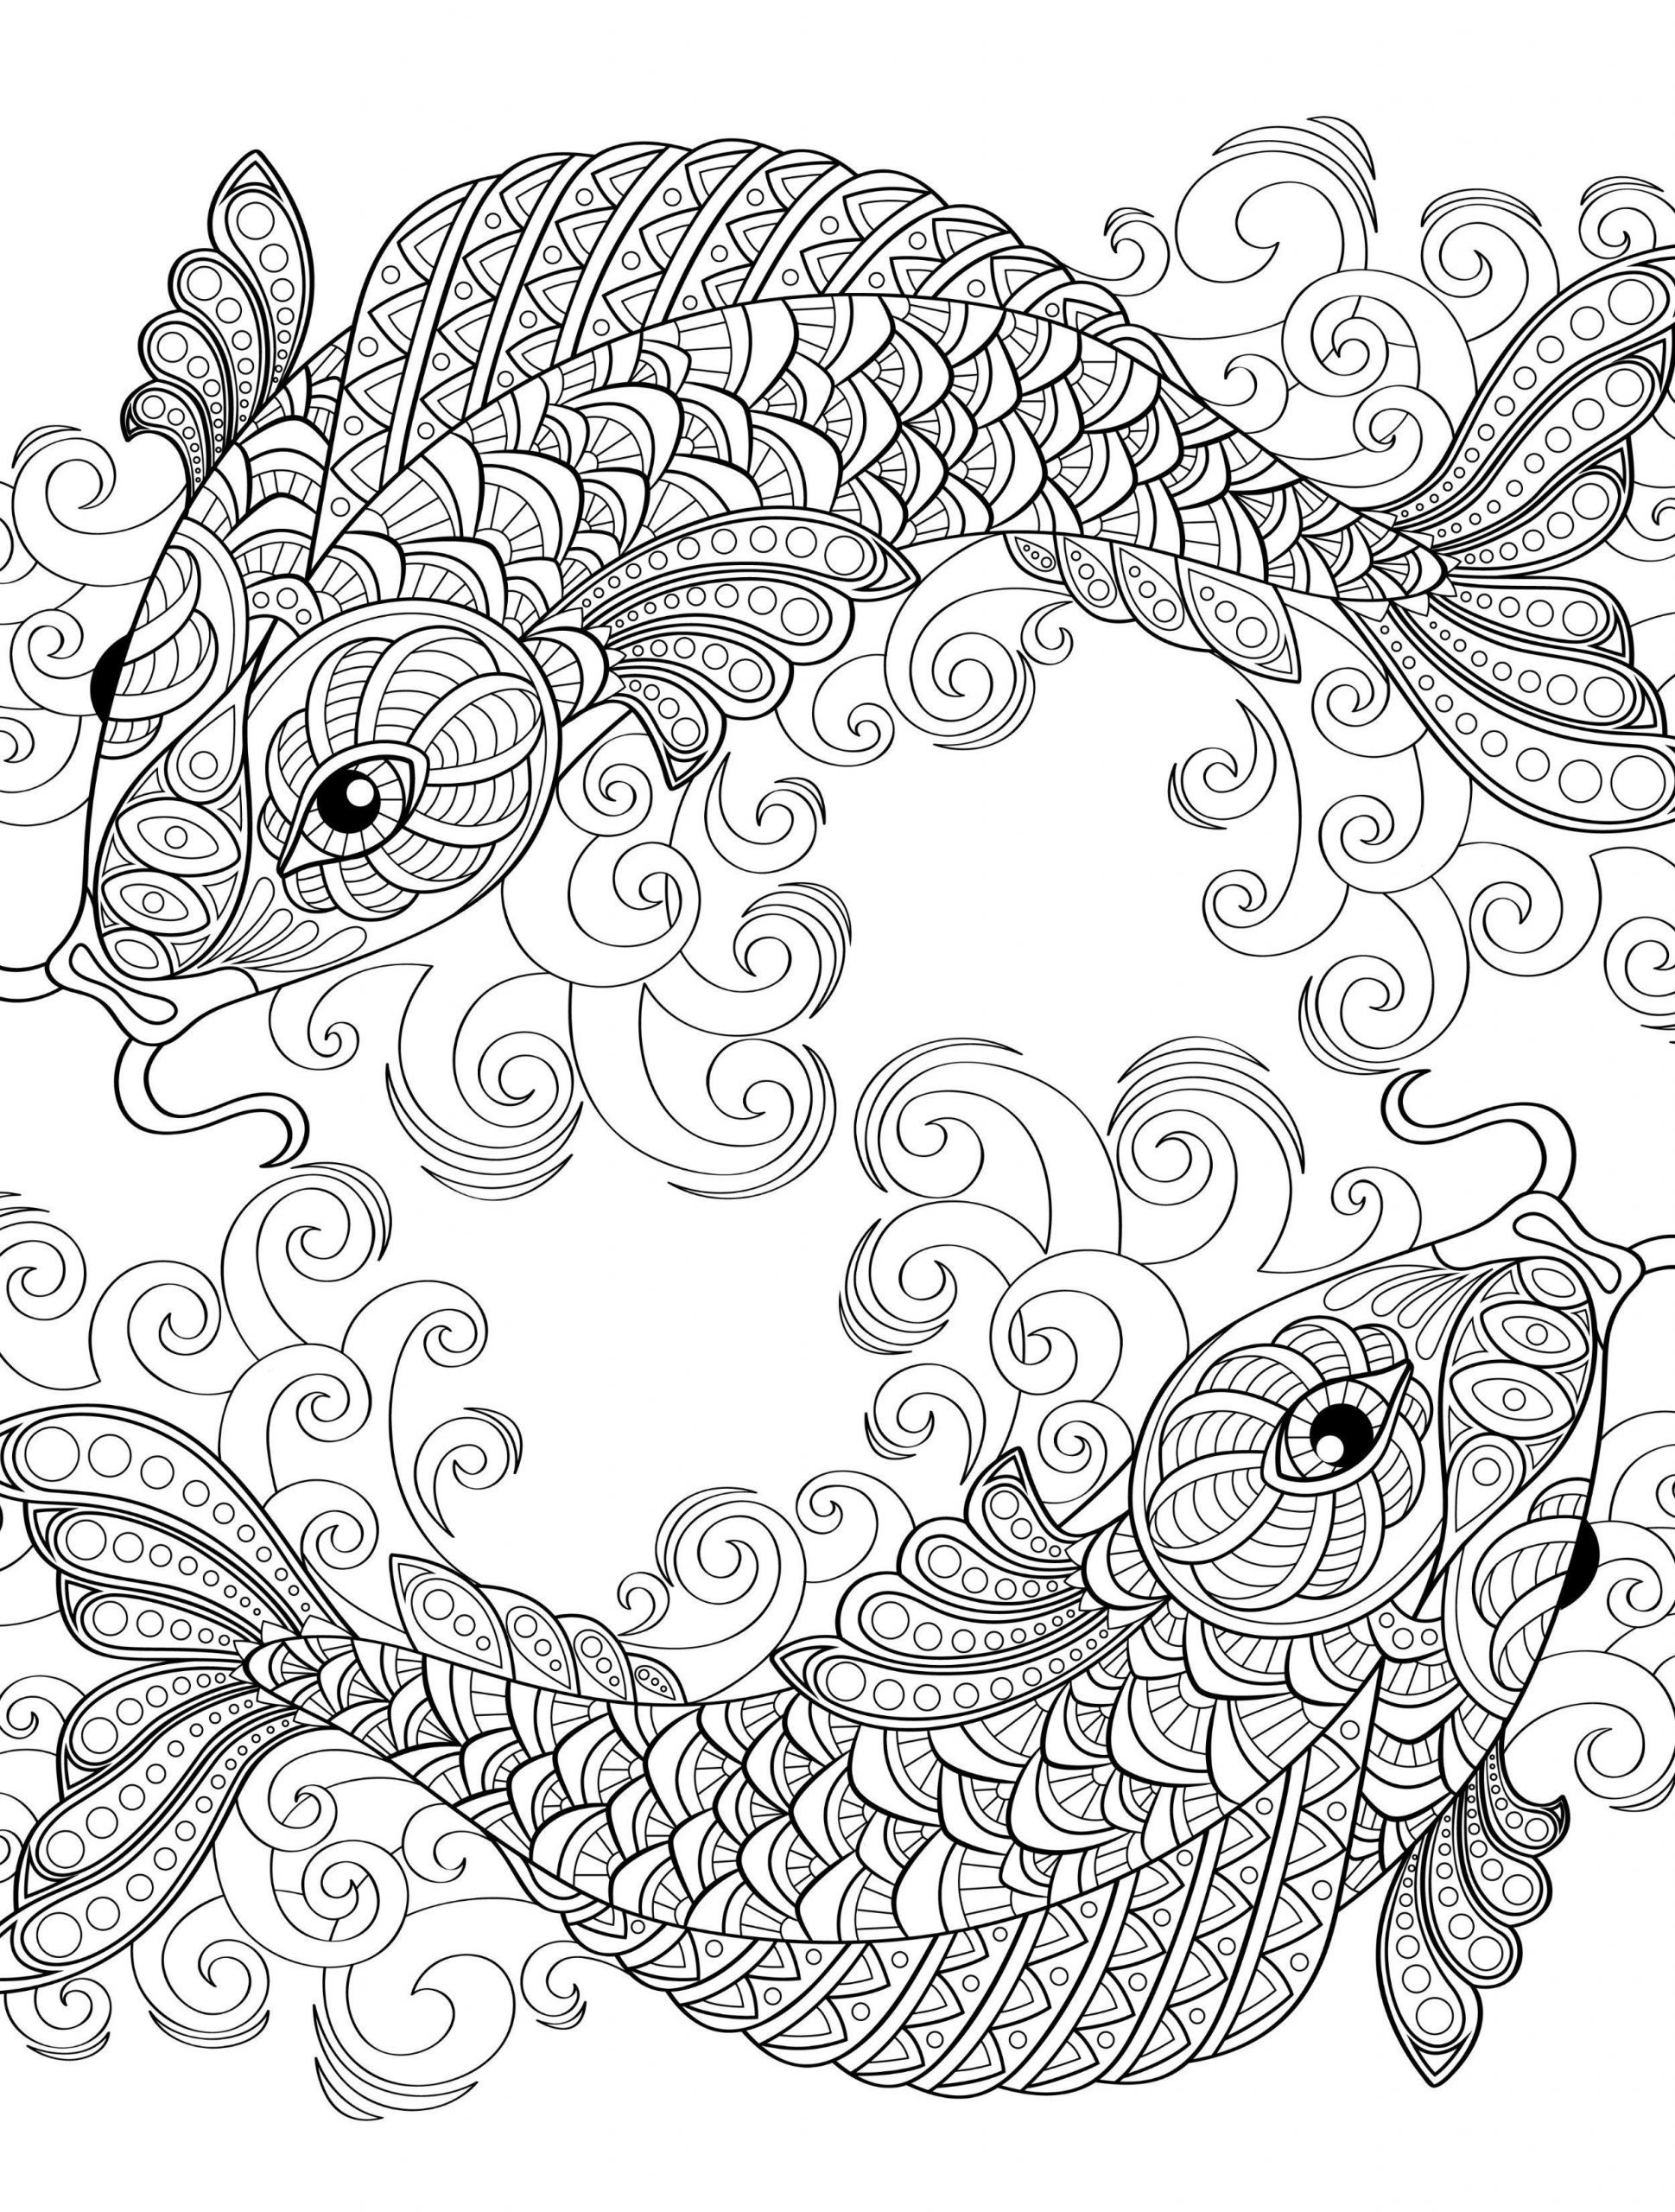 Fish Adult Coloring Pages
 18 Absurdly Whimsical Adult Coloring Pages Page 18 of 20